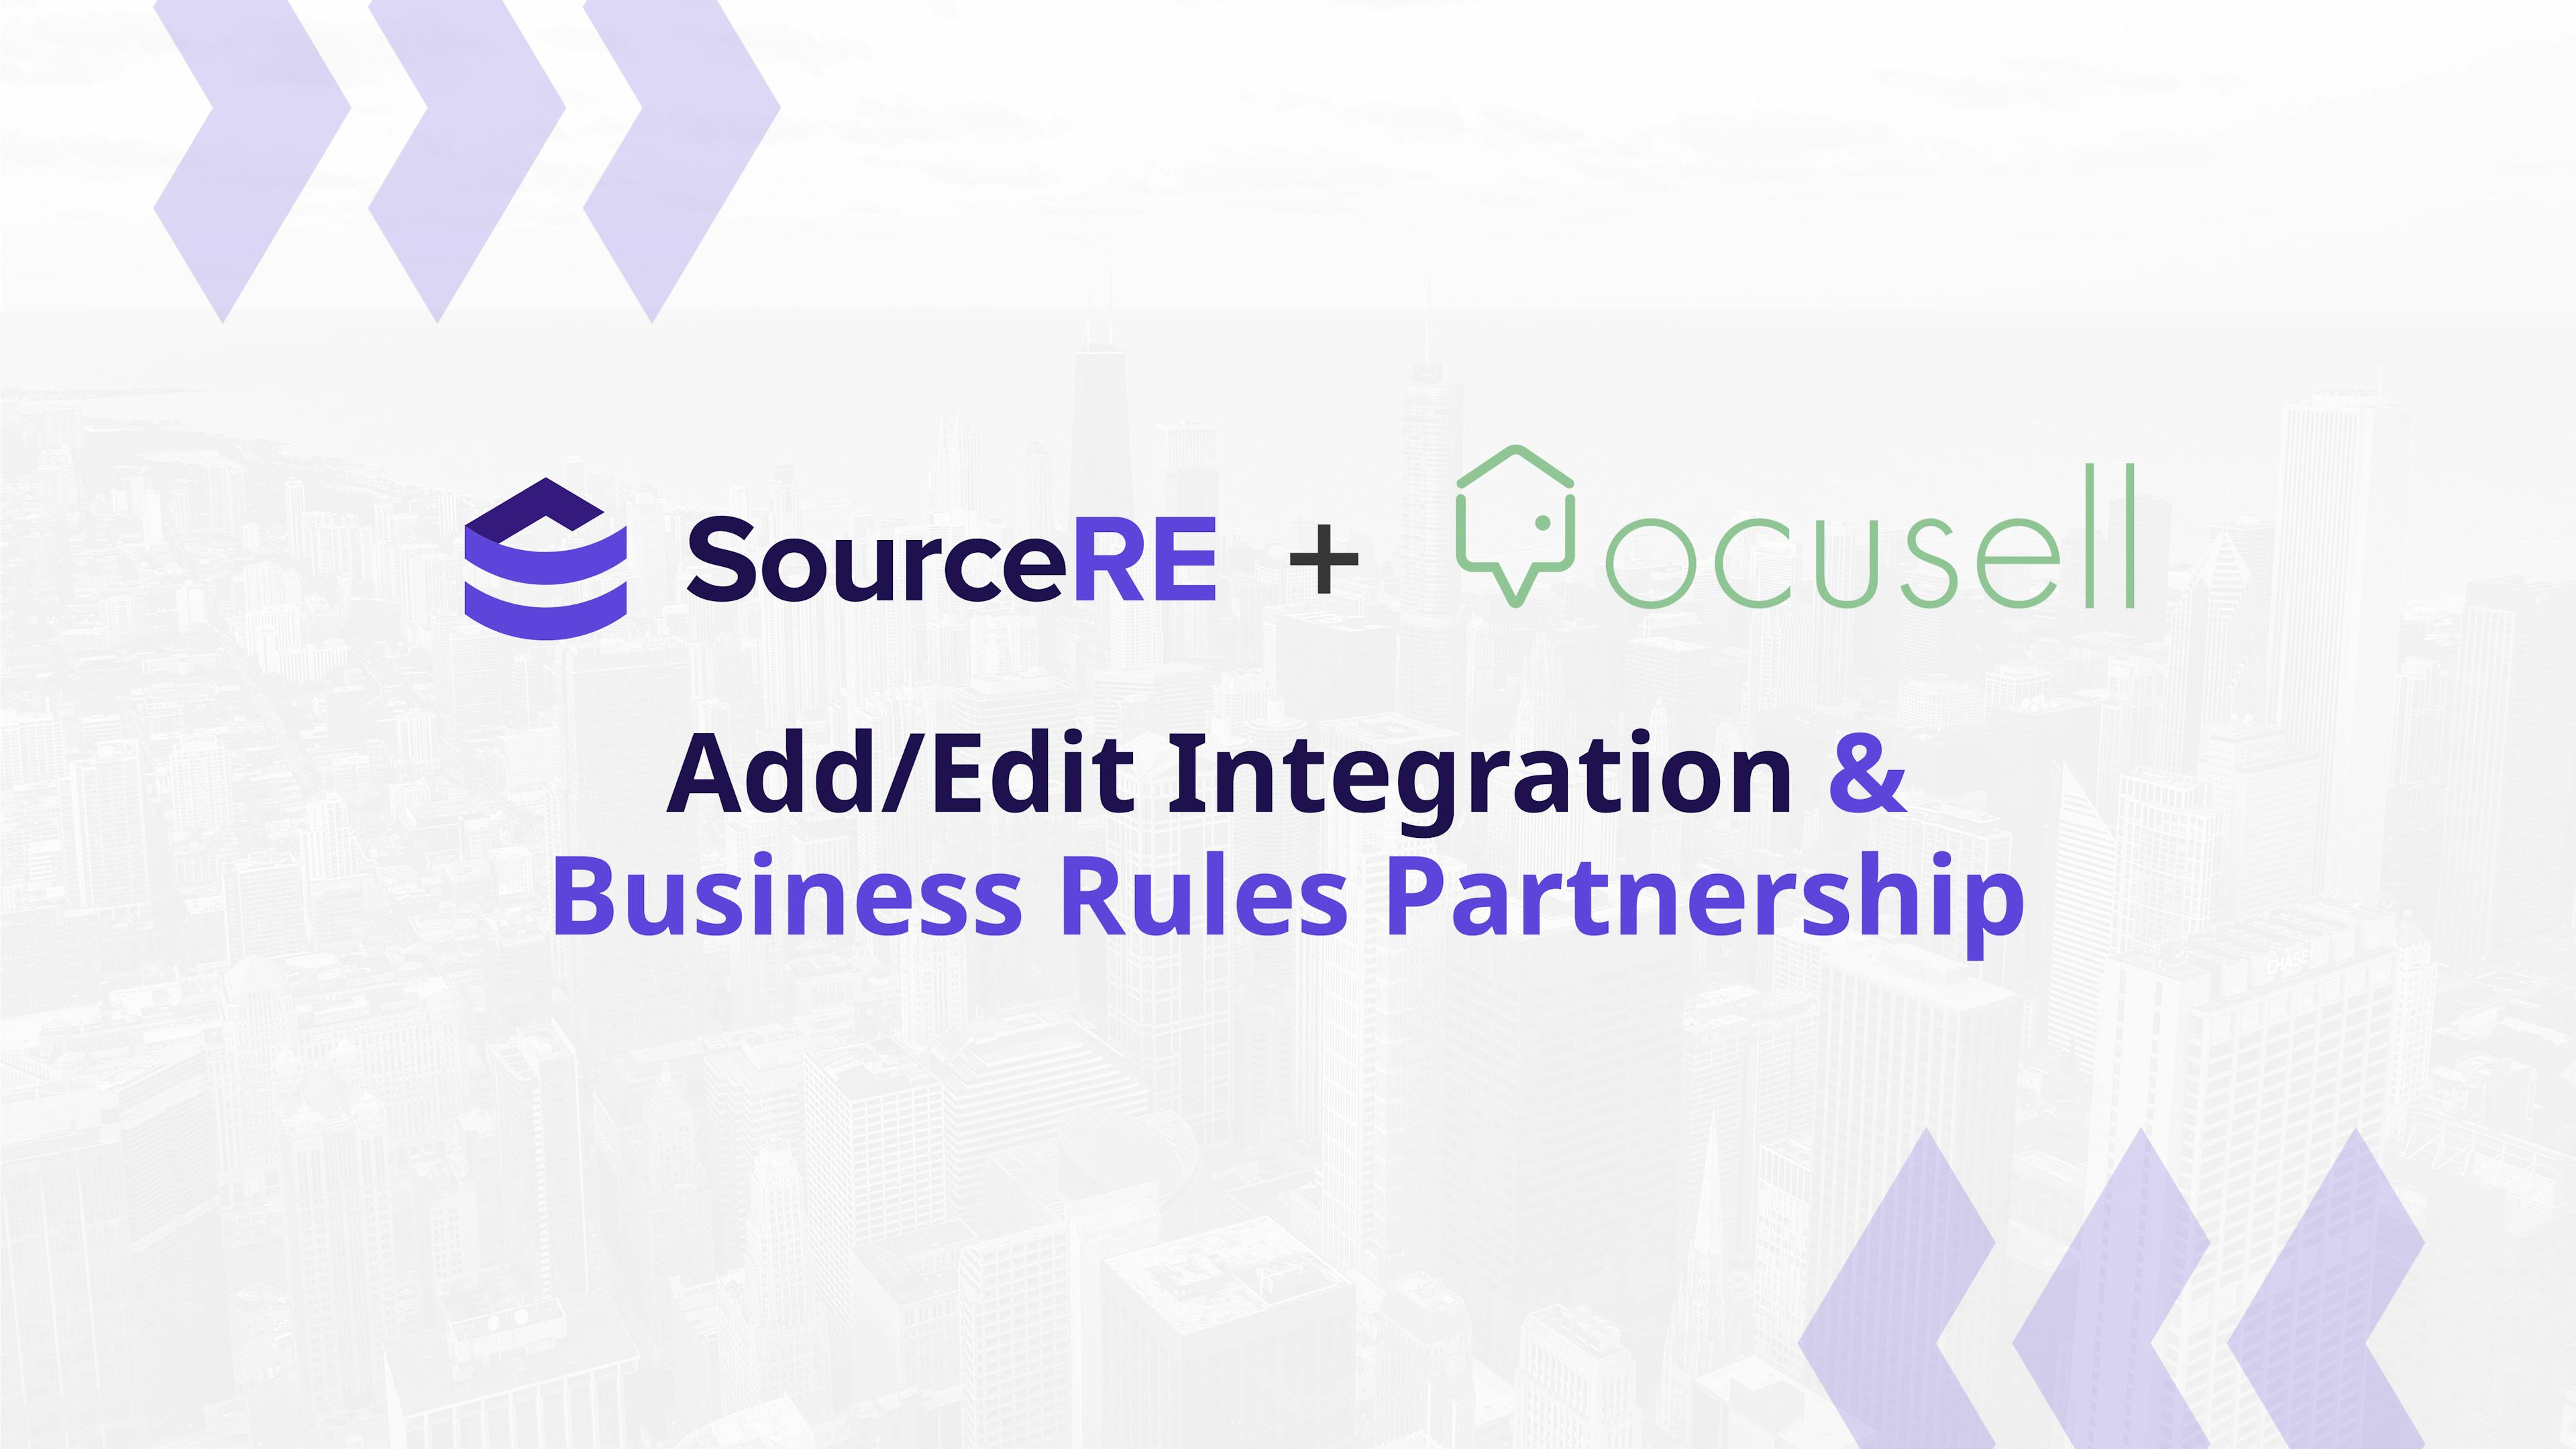 Ocusell and SourceRE Announce Add/Edit Integration and Business Rules Partnership0